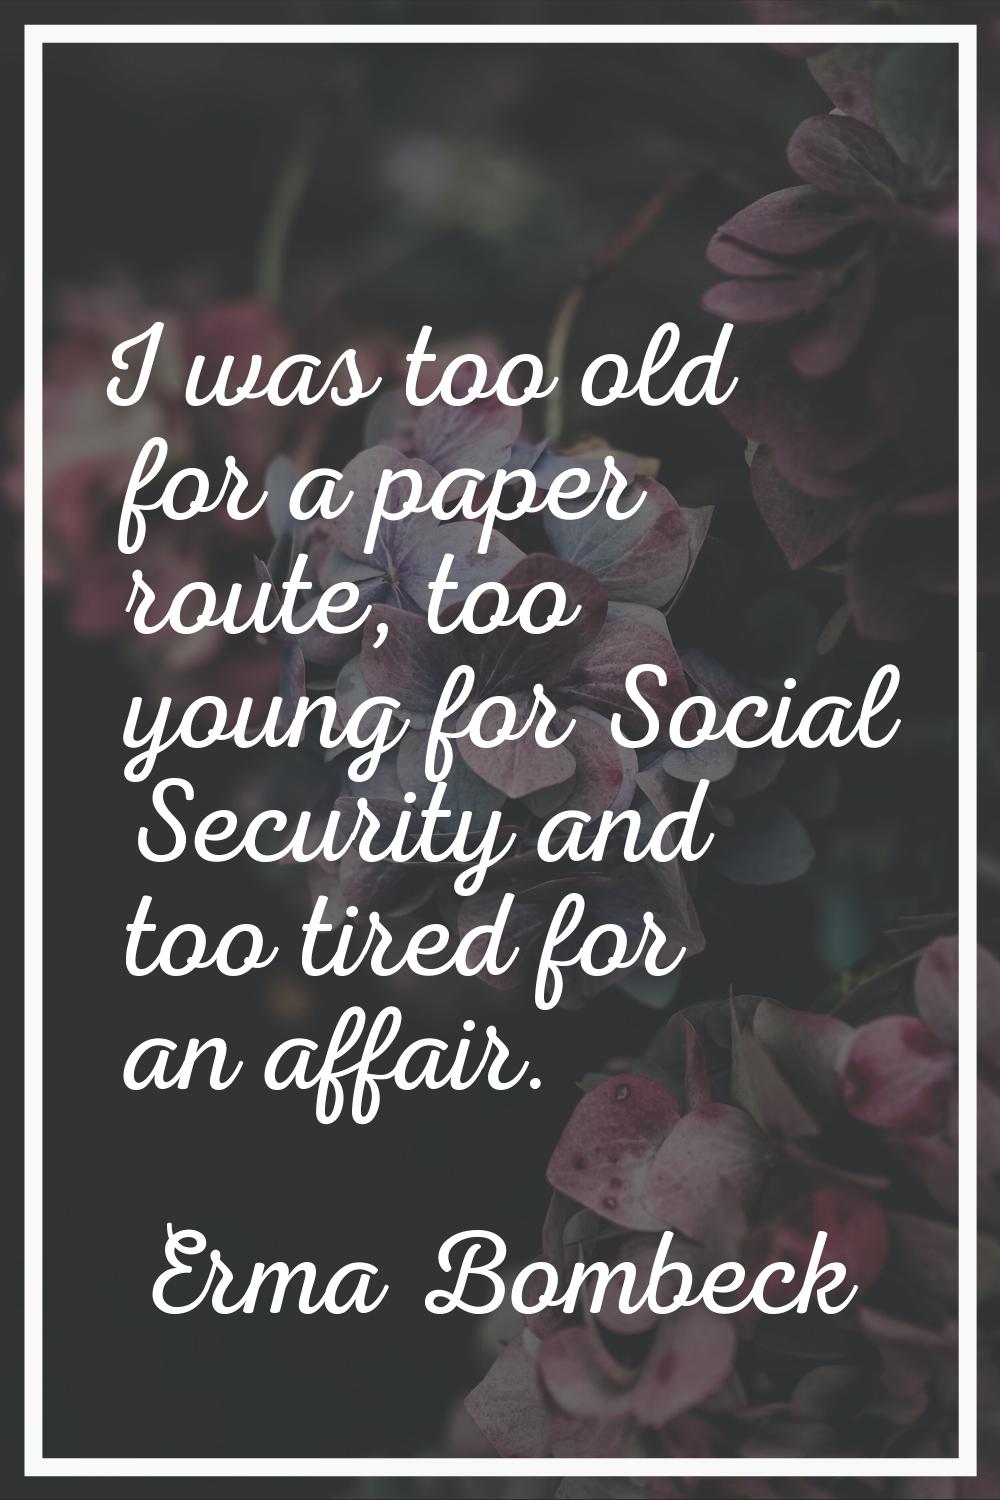 I was too old for a paper route, too young for Social Security and too tired for an affair.